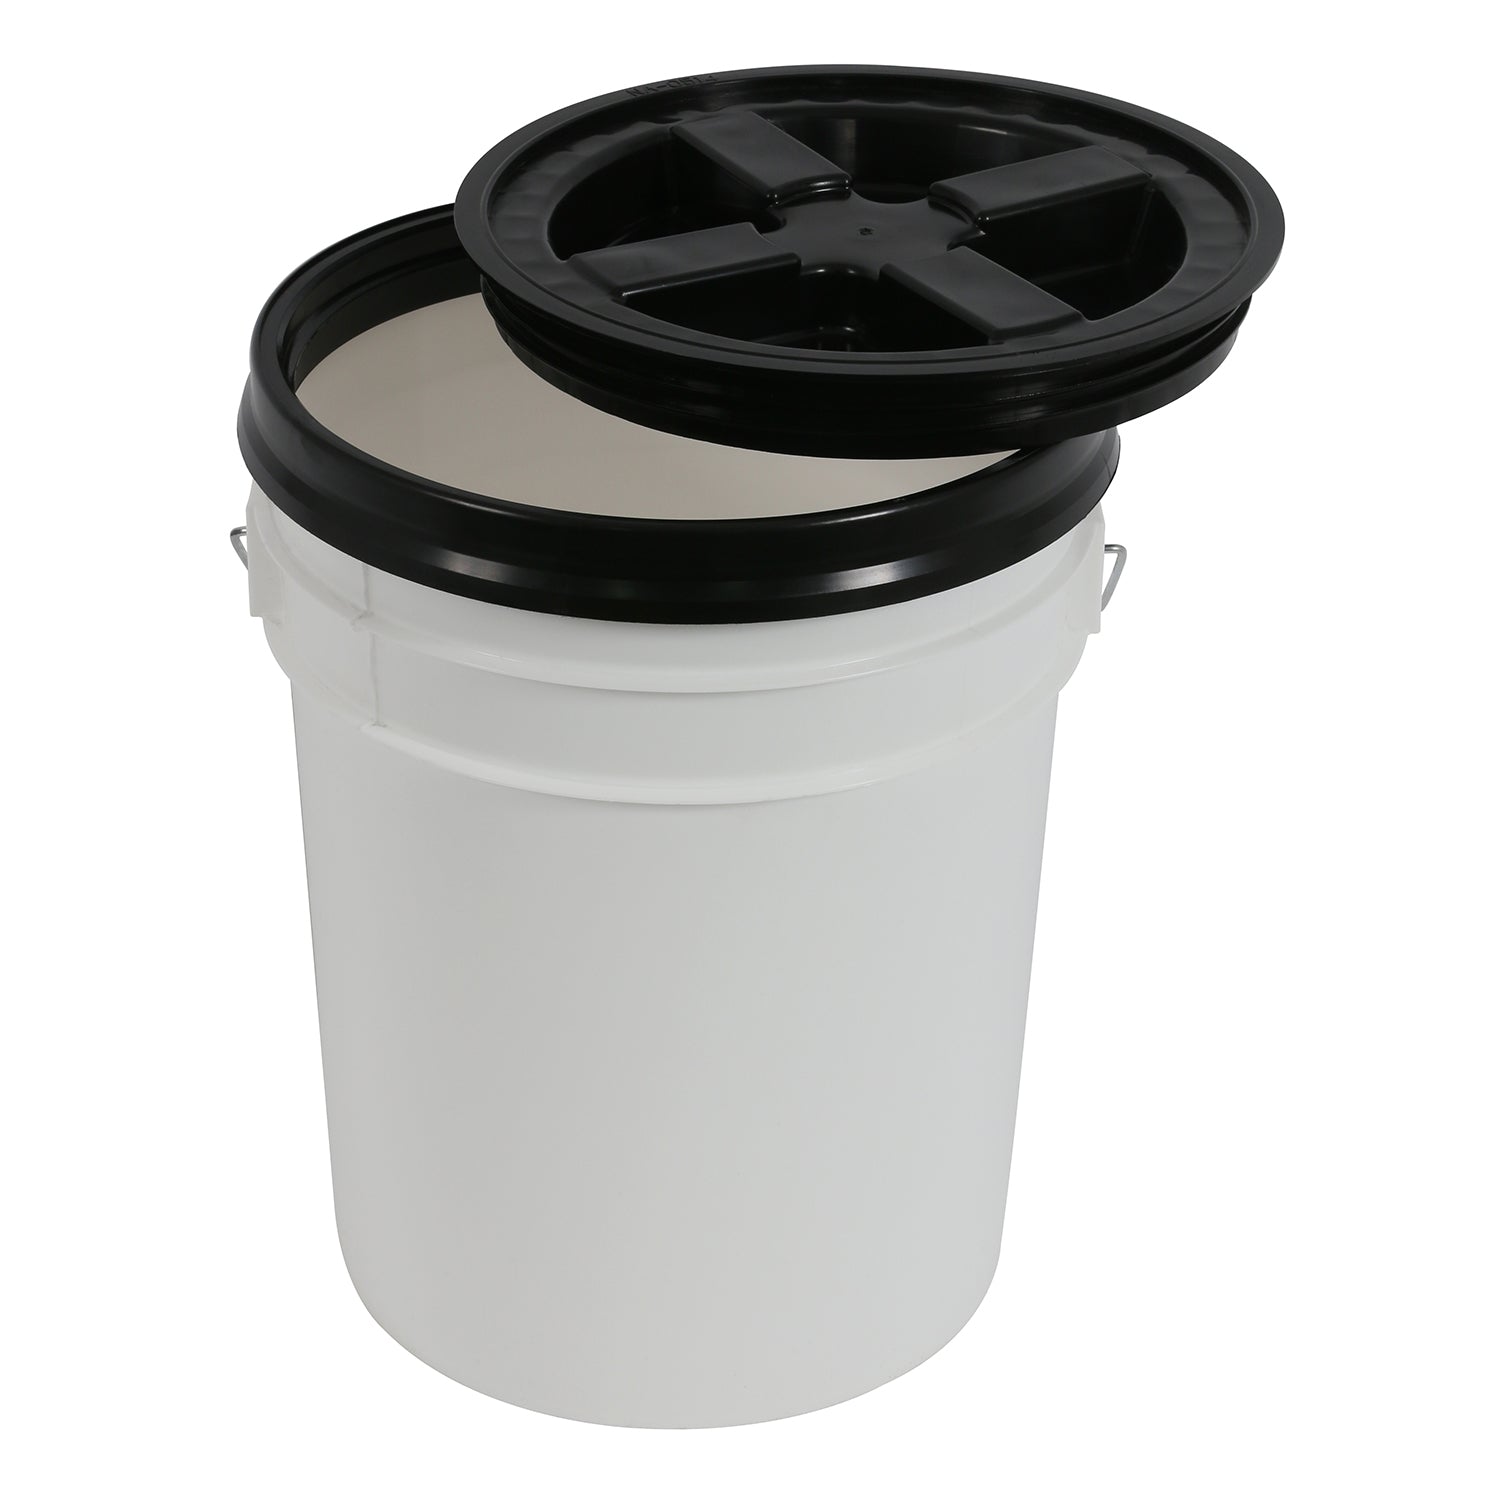 Gamma Seal Lid for 3.5 and 5 Gallon Buckets (U)